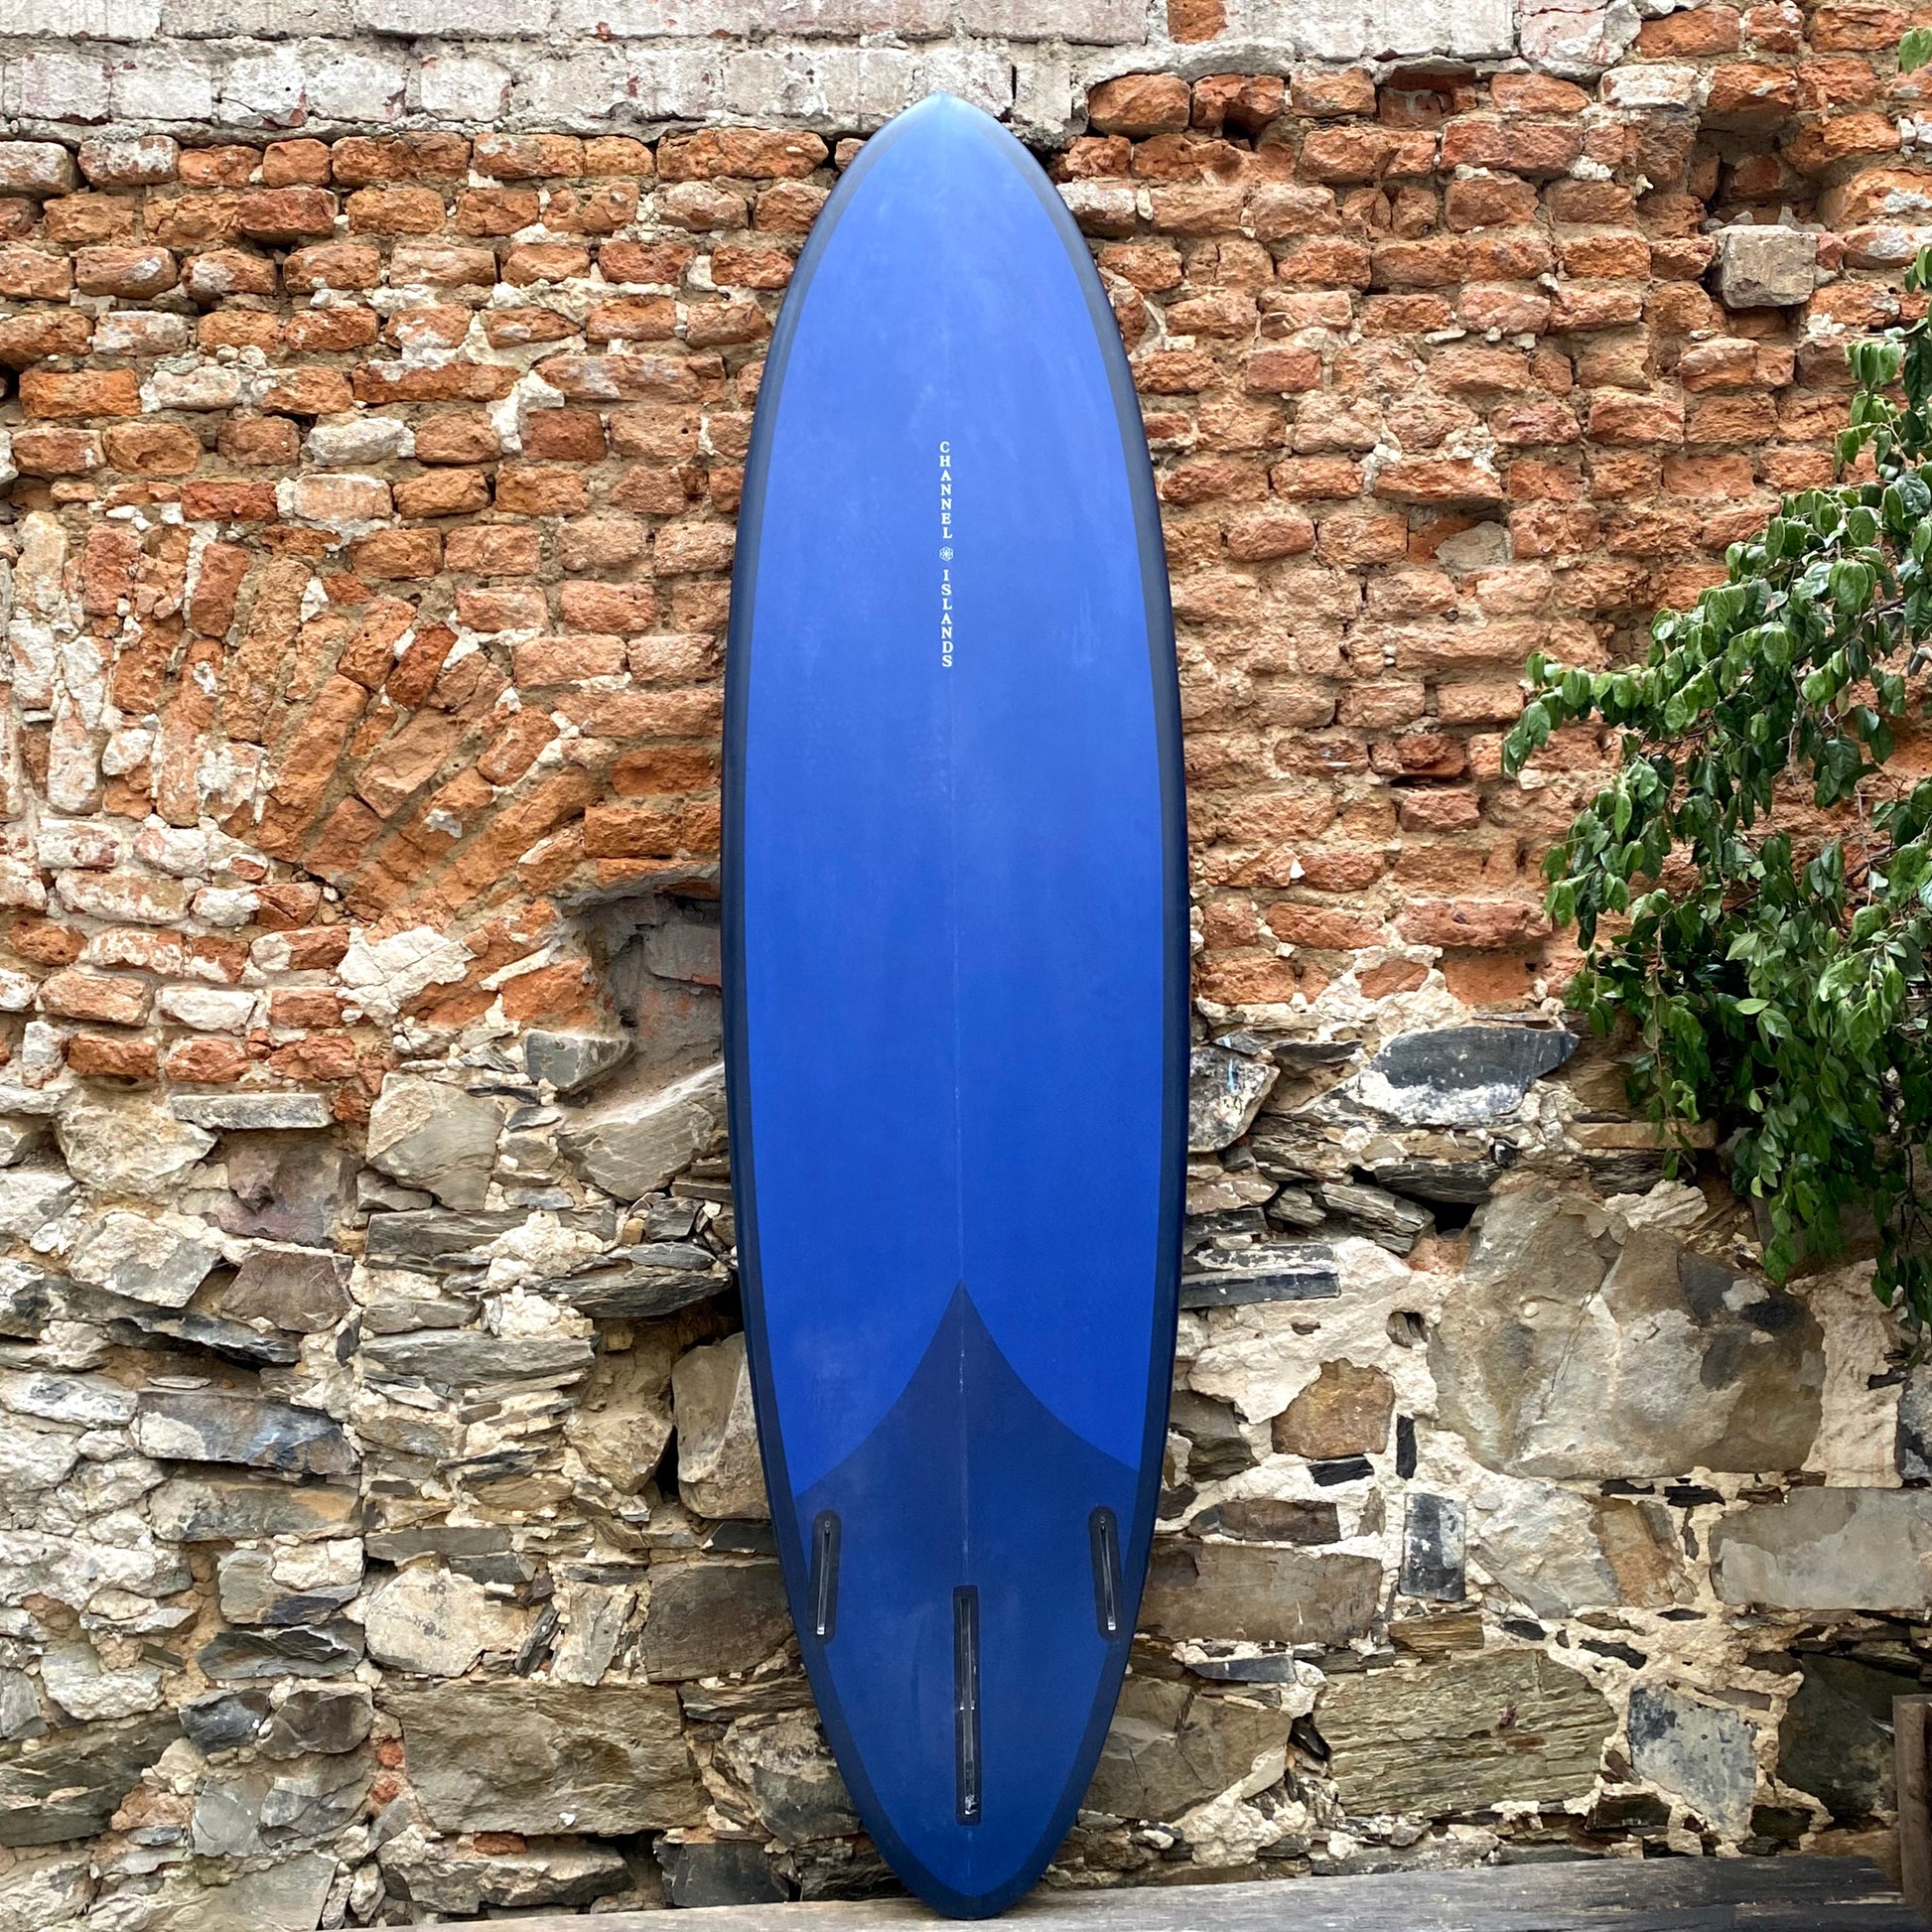 CHANNEL ISLANDS MID 7'0" 21 1/8" 2 3/4" 44.9L NAVY BLUE